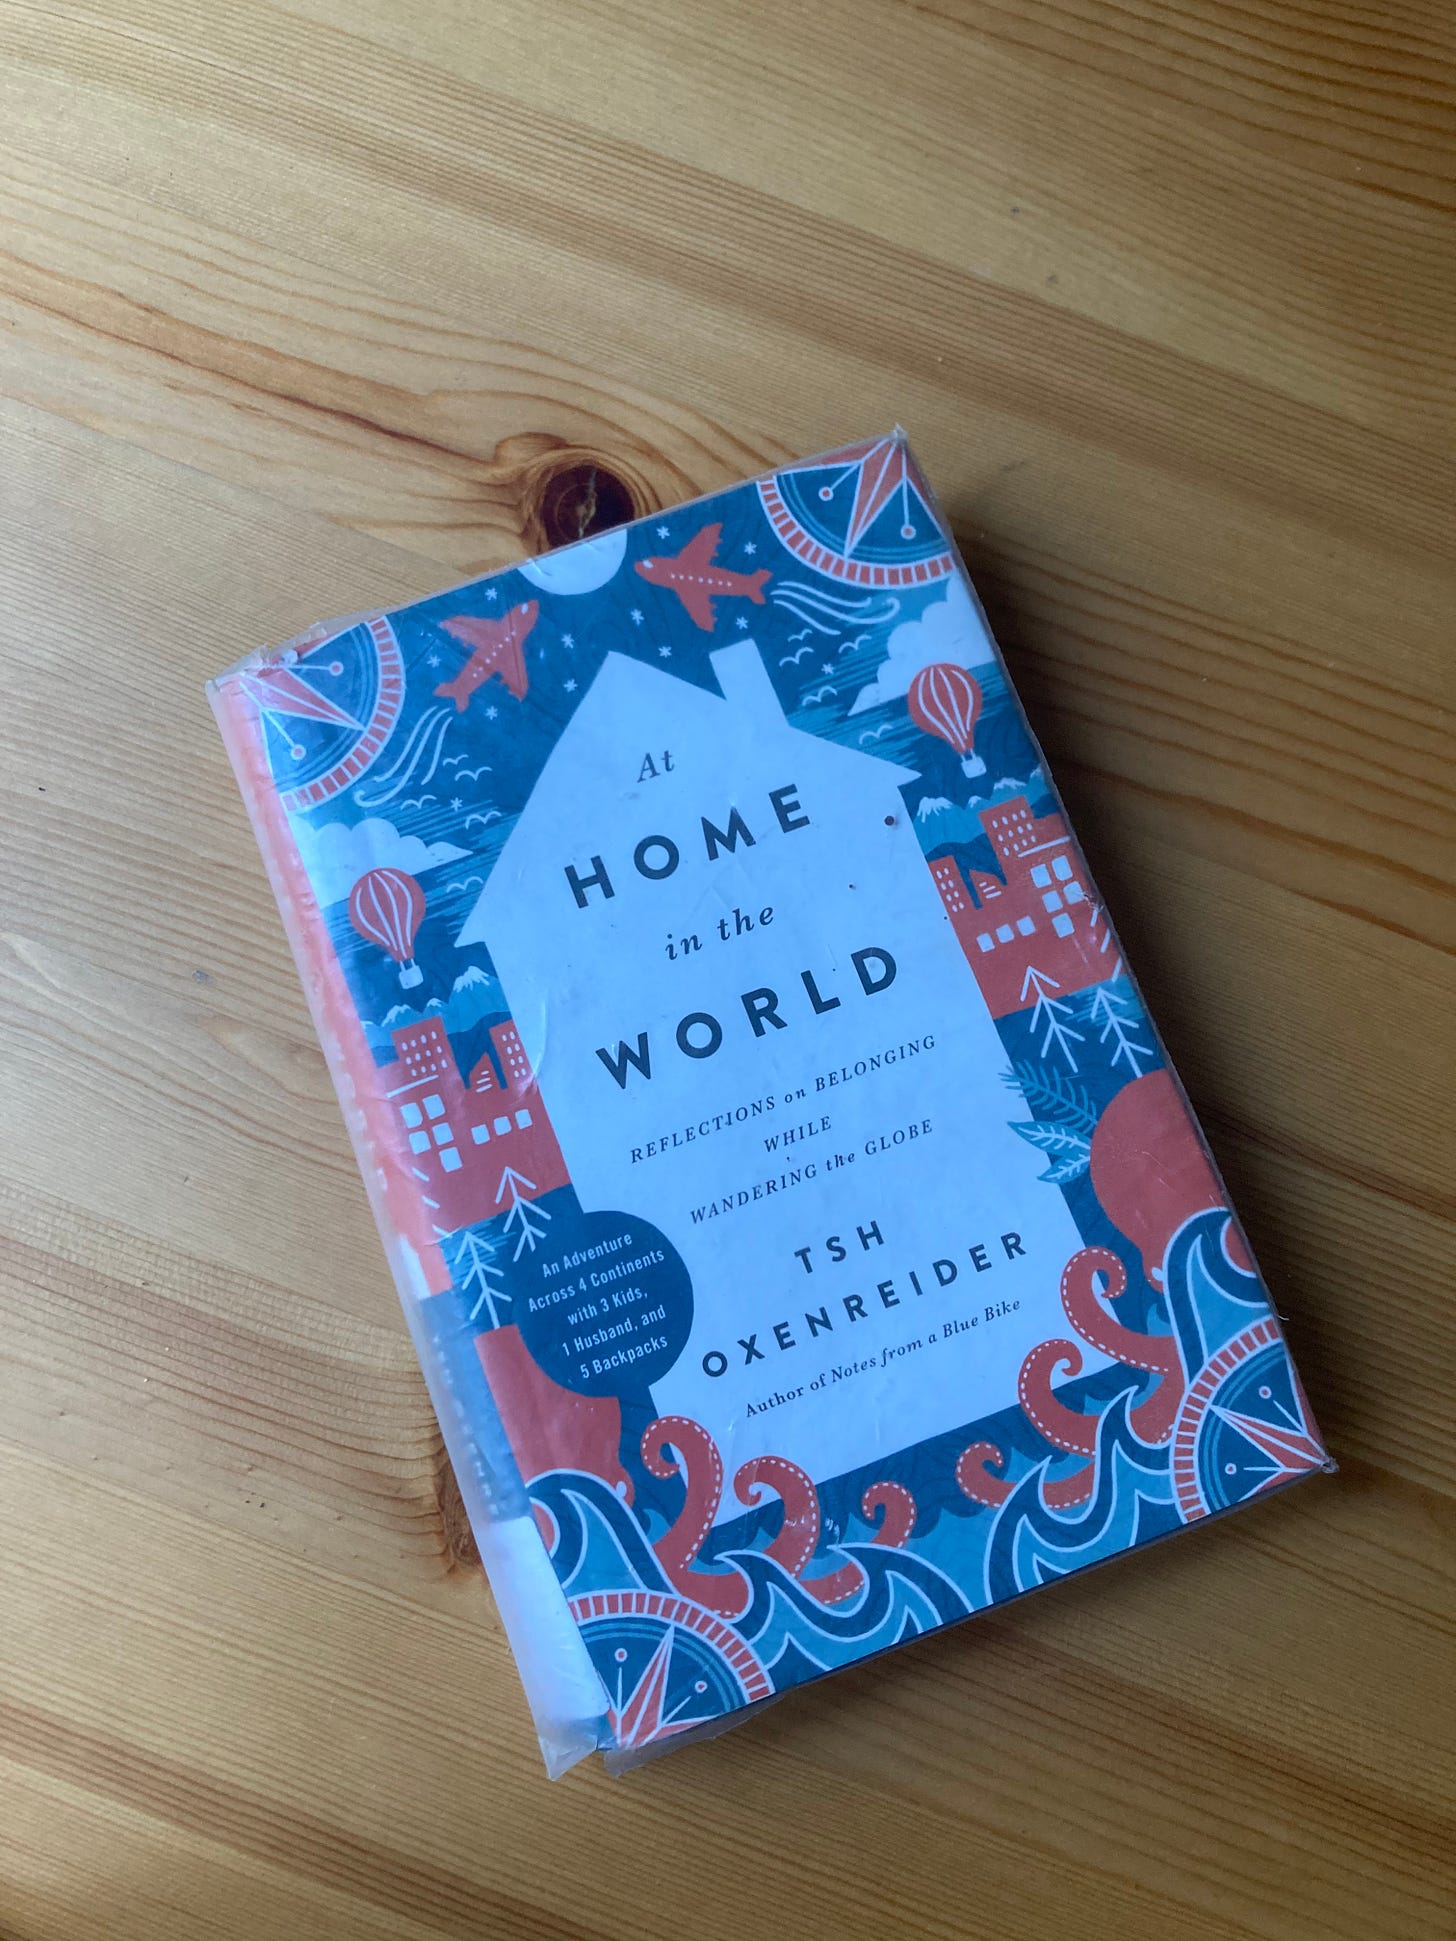 Book cover for At Home in the World by Tsh Oxenreider.